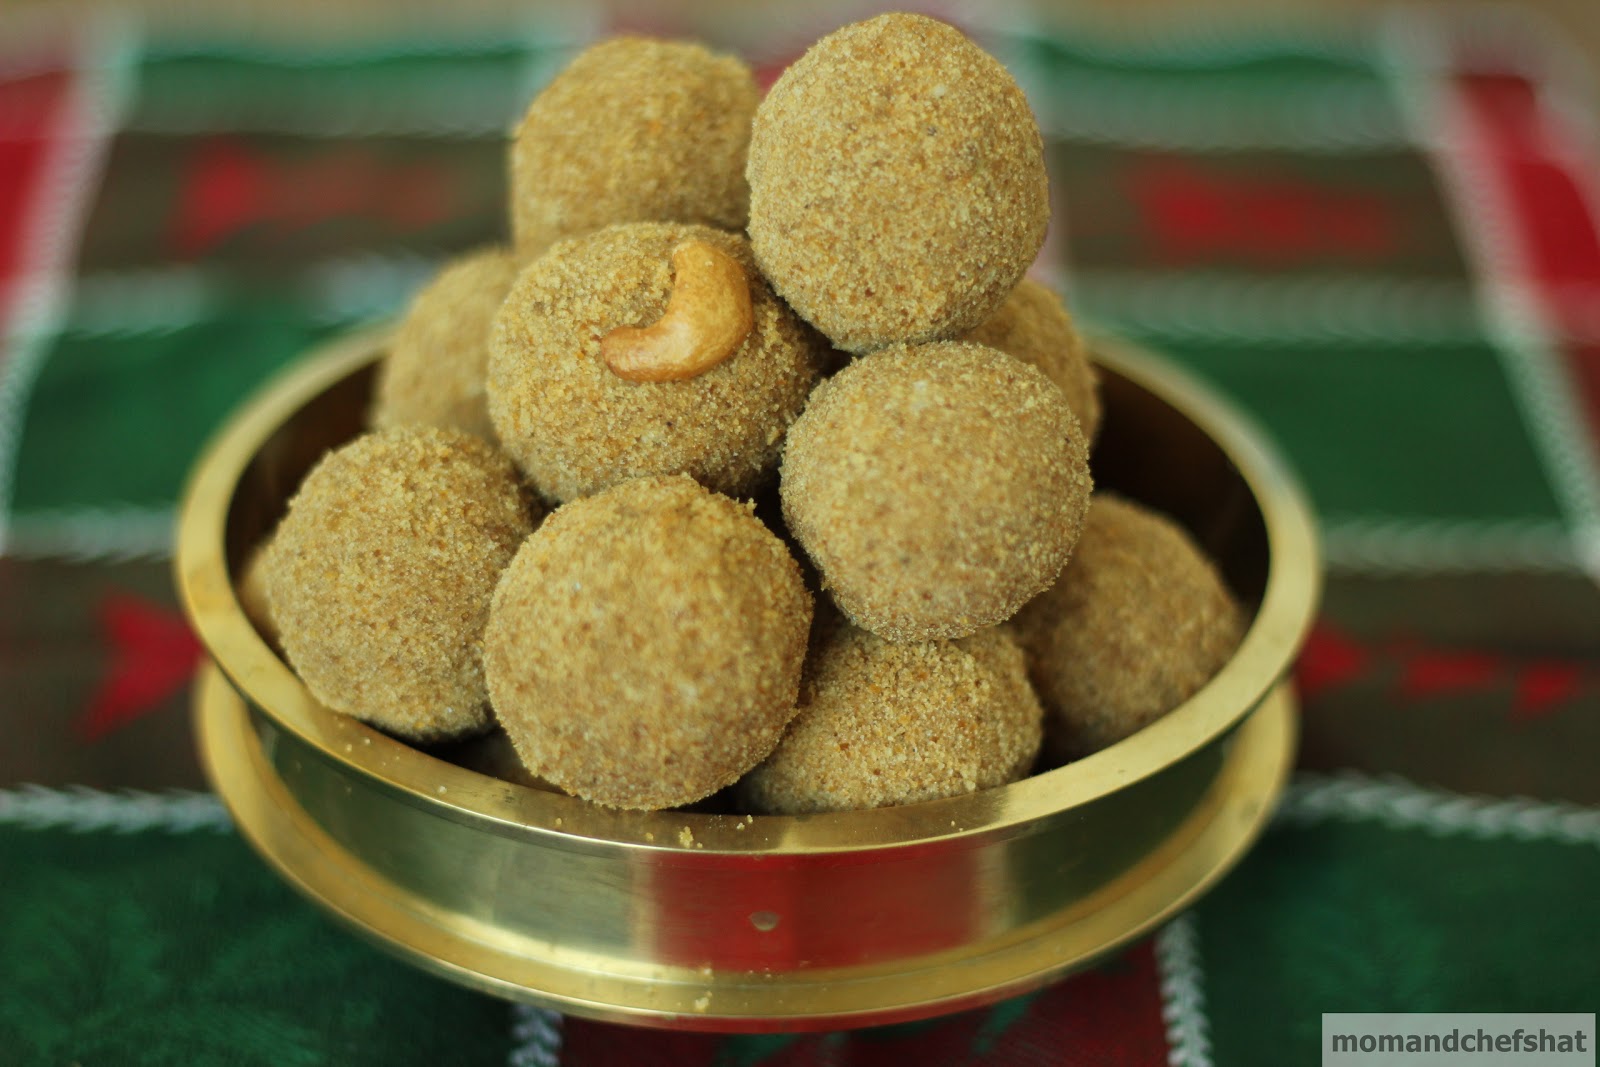 Cooking in mommy's shoes: Ari Unda/Roasted Kerala rice balls